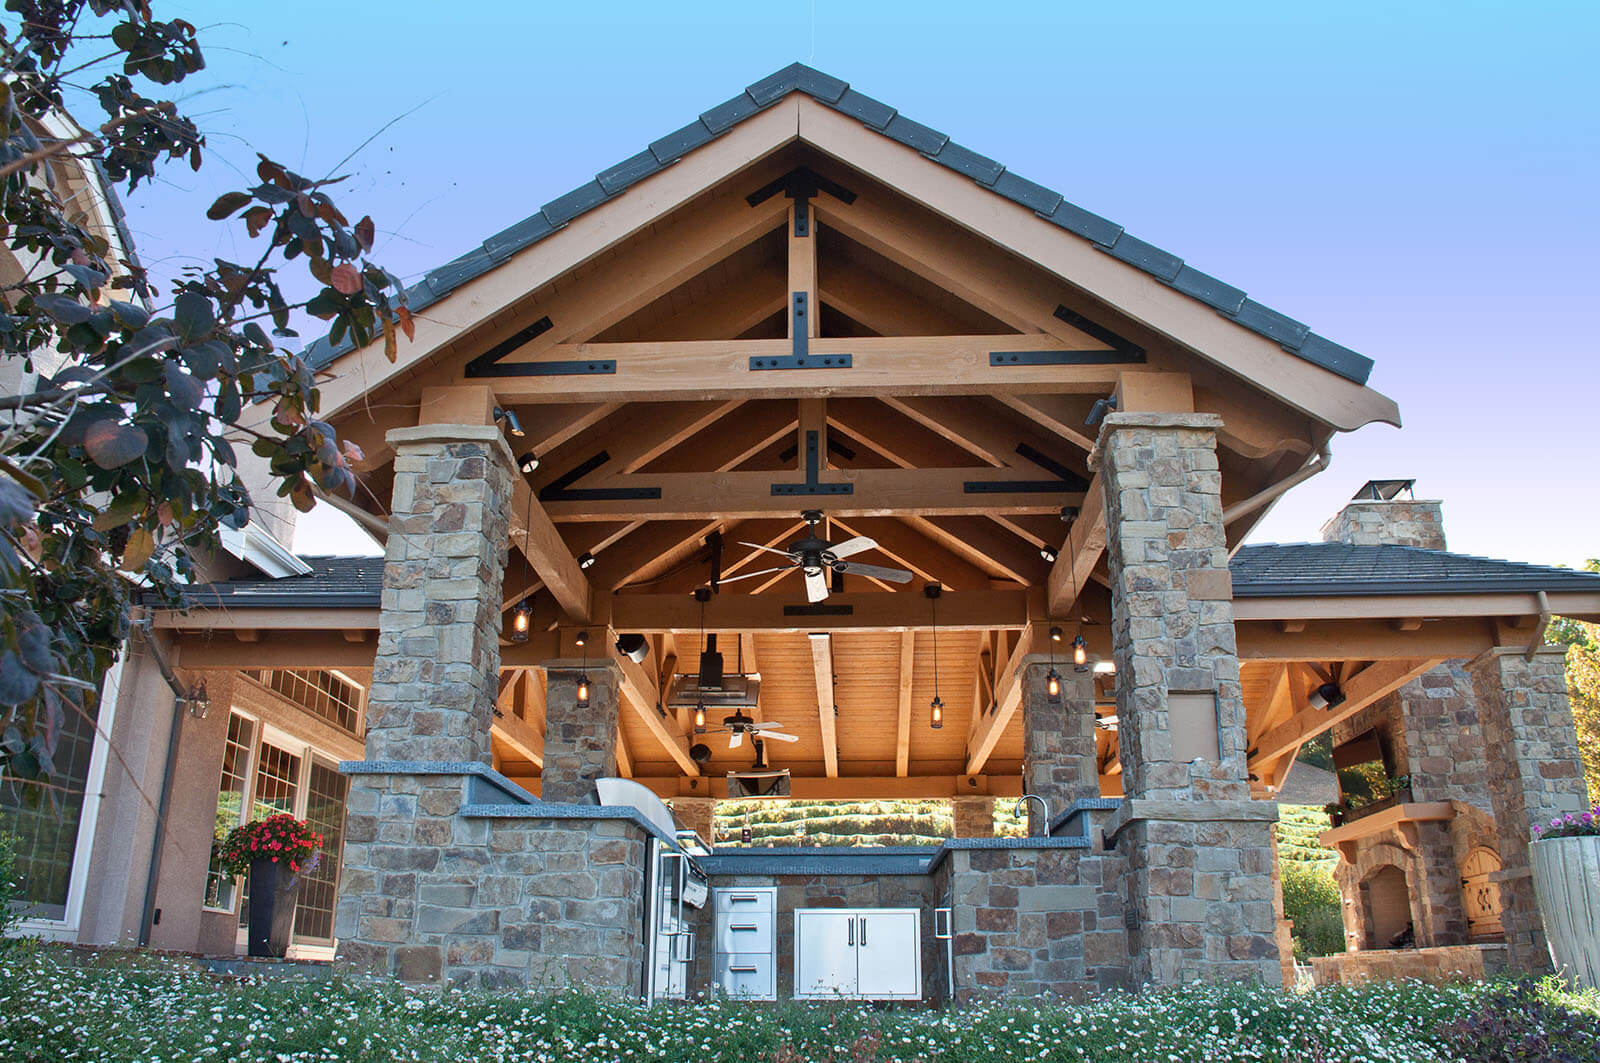 Stone pillars support a complex wooden pergola with open rafters, outdoor kitchen and fireplace